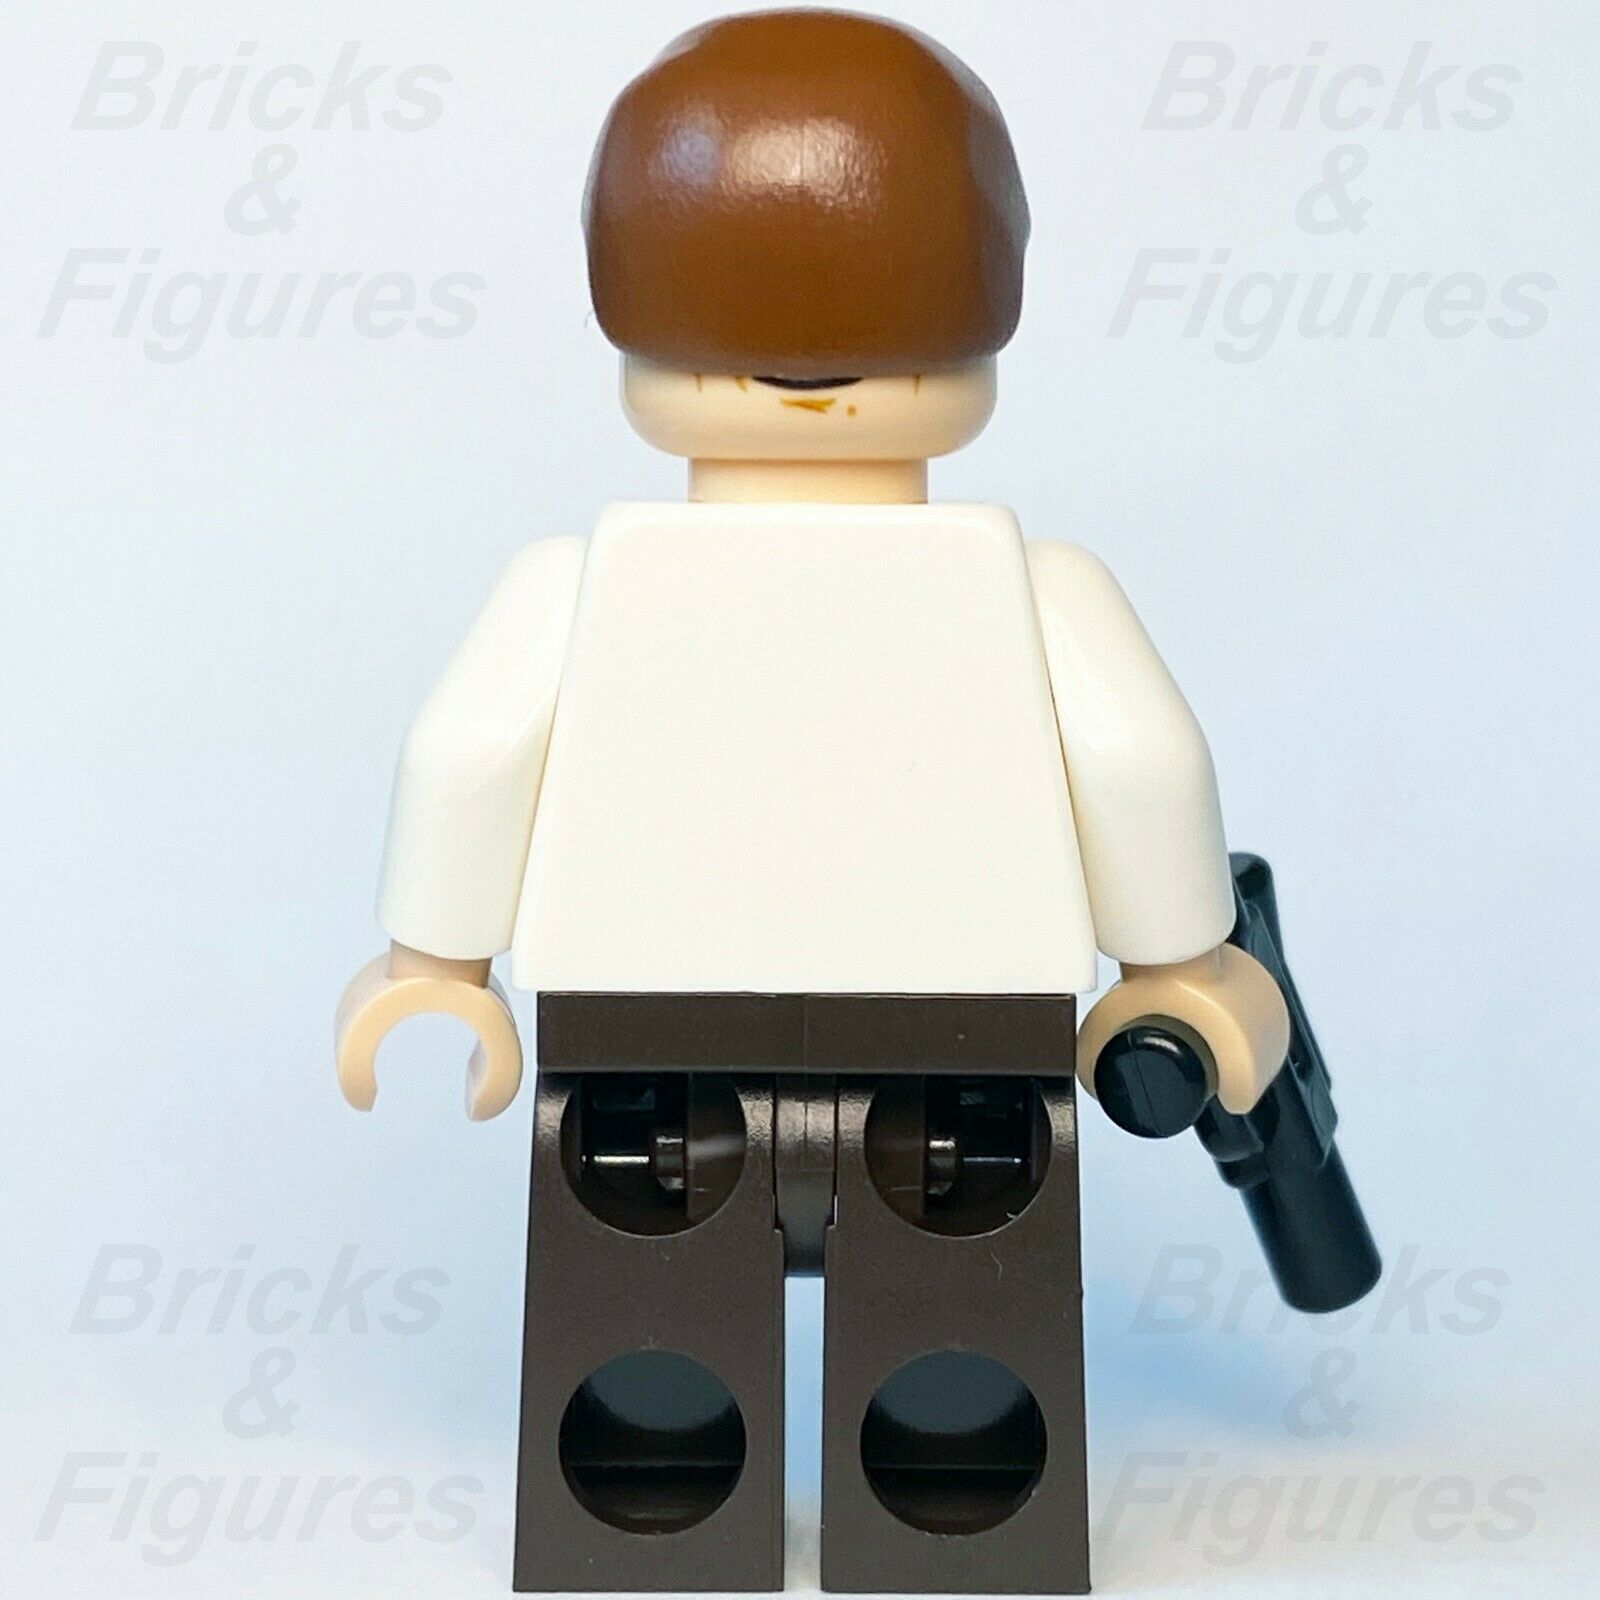 New Star Wars LEGO Han Solo Rebel Alliance Carbonite Outfit Minifigure 75137 - Bricks & Figures